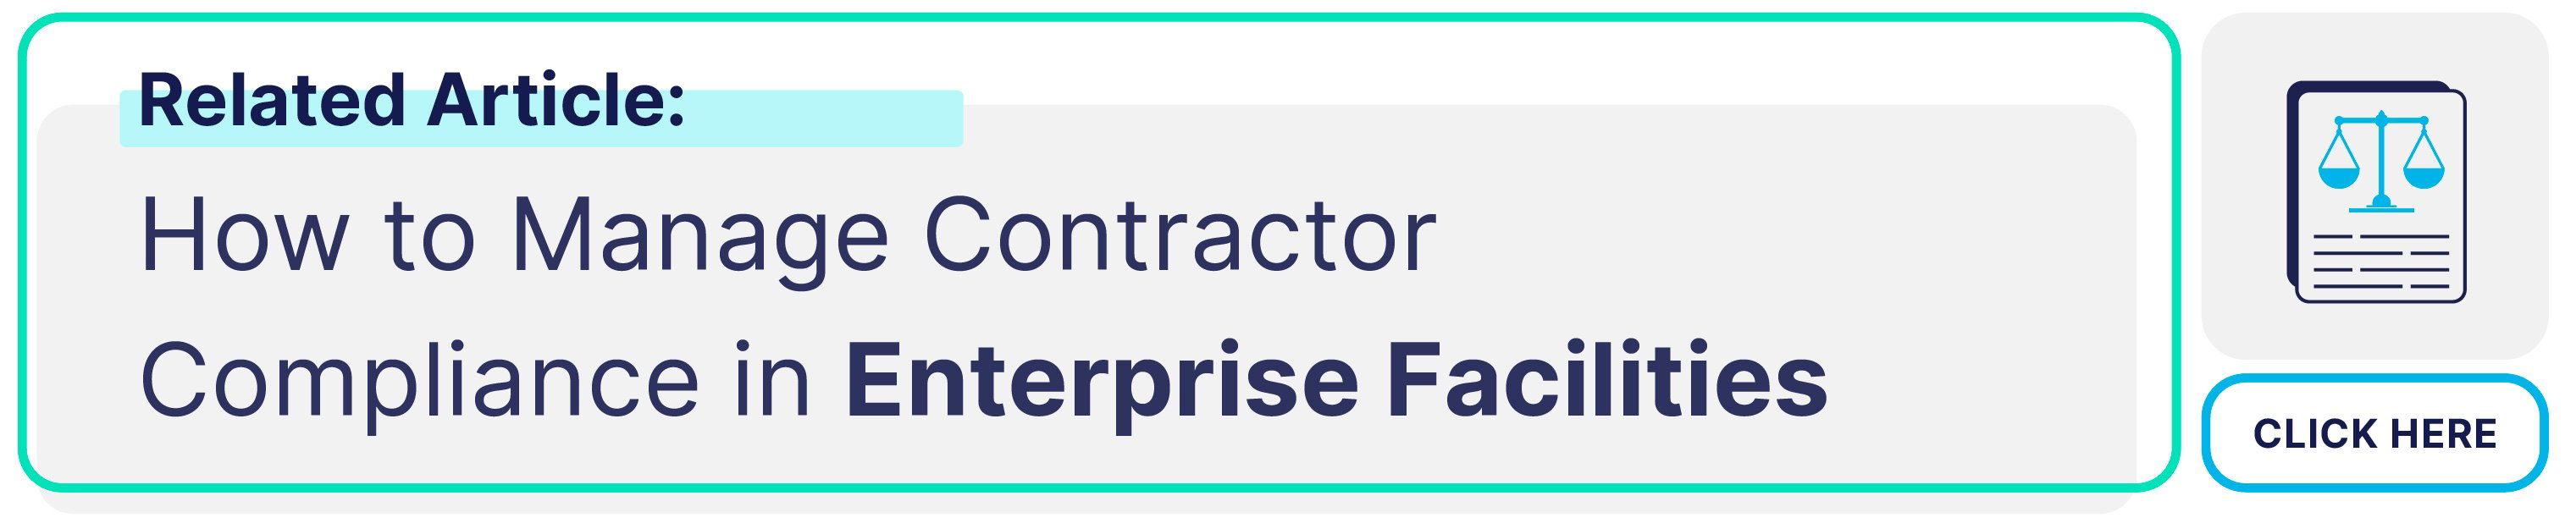 How to Manage Contractor Compliance in Enterprise Facilities